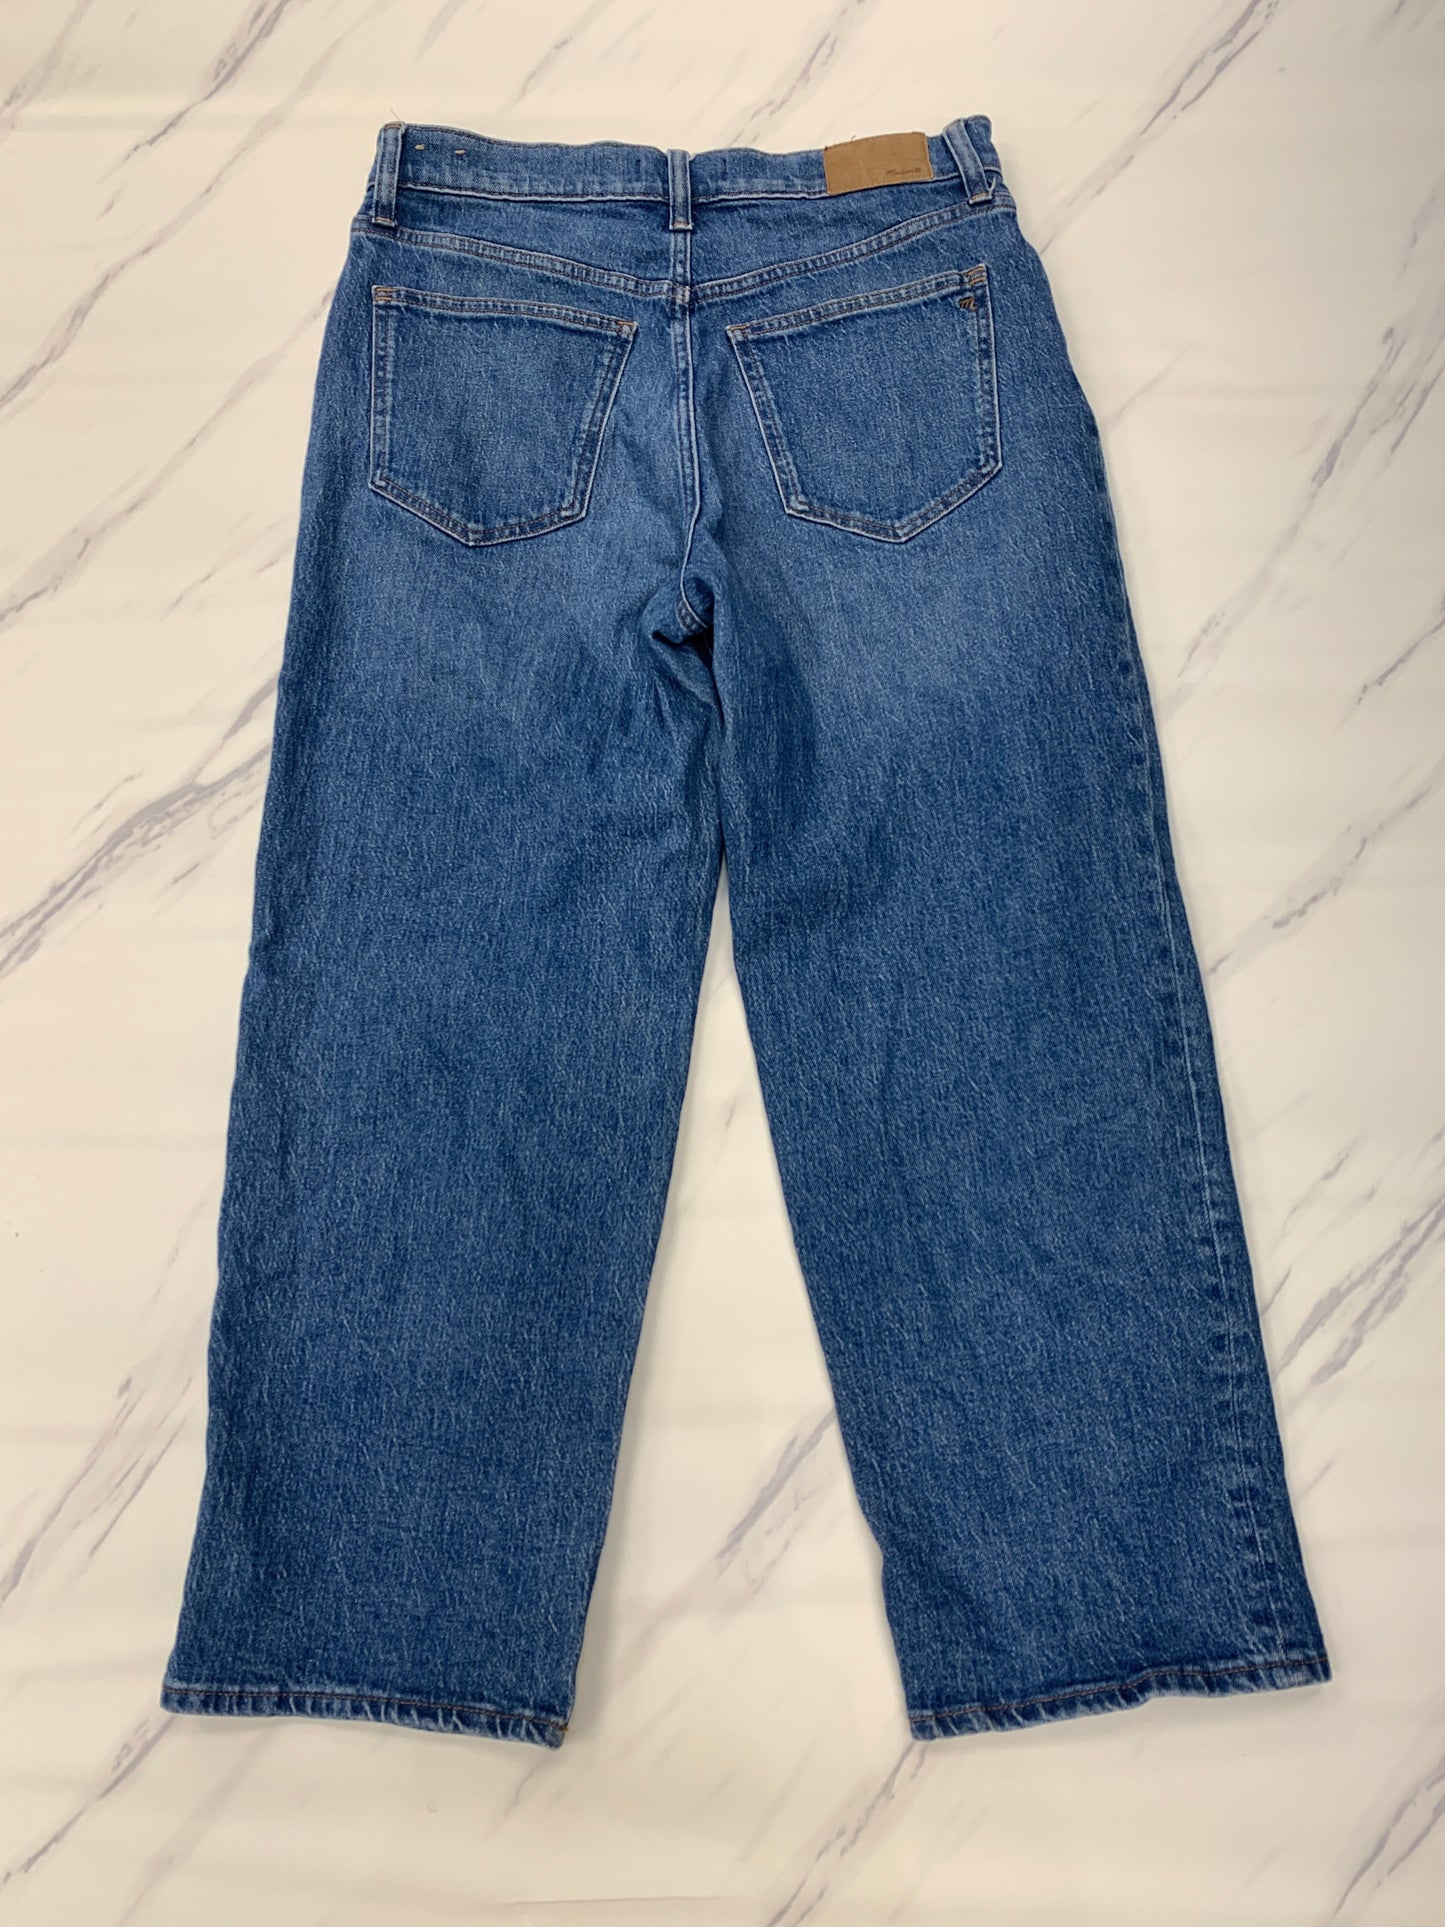 Jeans Wide Leg Madewell, Size 8petite